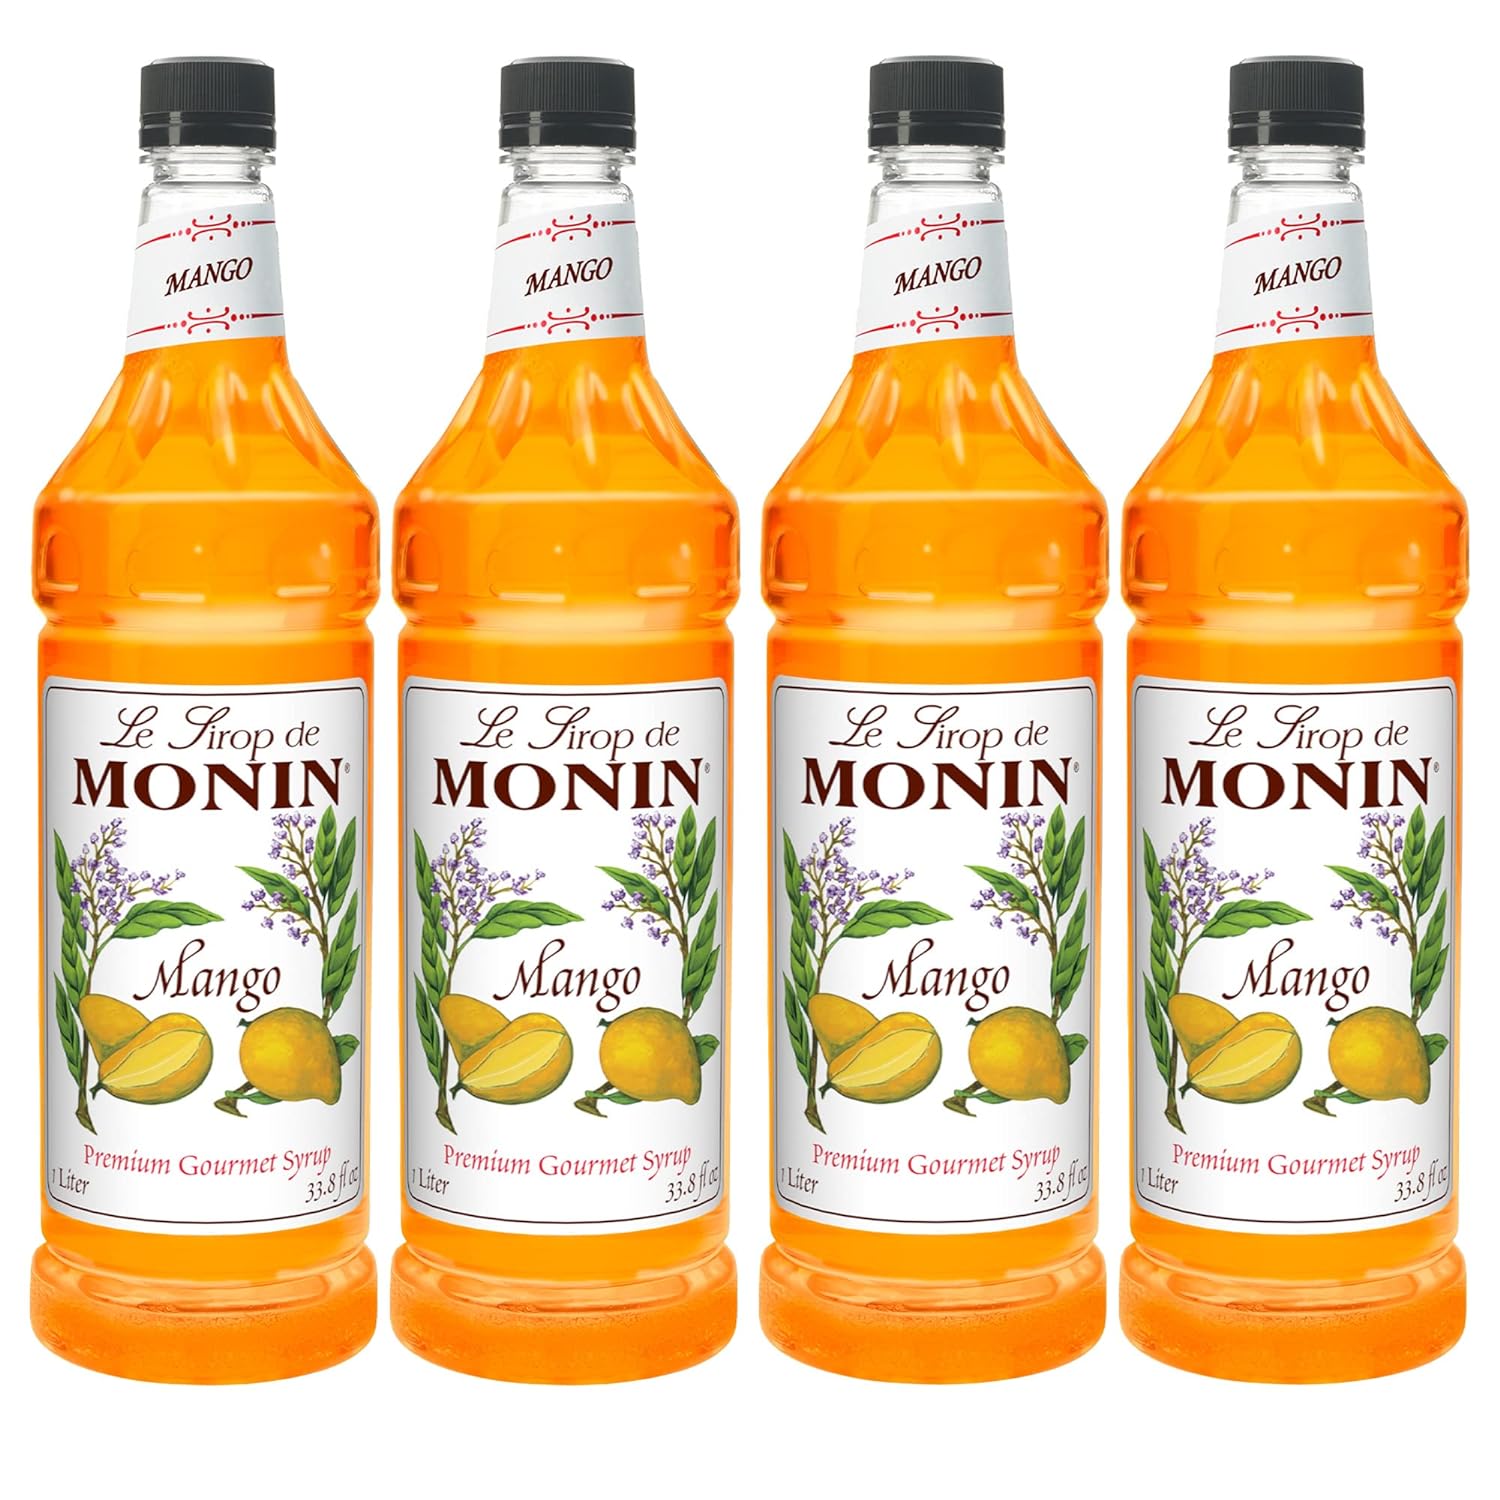 syrup Monin - Mango Syrup, Tropical and Sweet, Great for Cocktails, Sodas, and Lemonades, Gluten-Free, Non-GMO (1 Liter, 4-Pack)